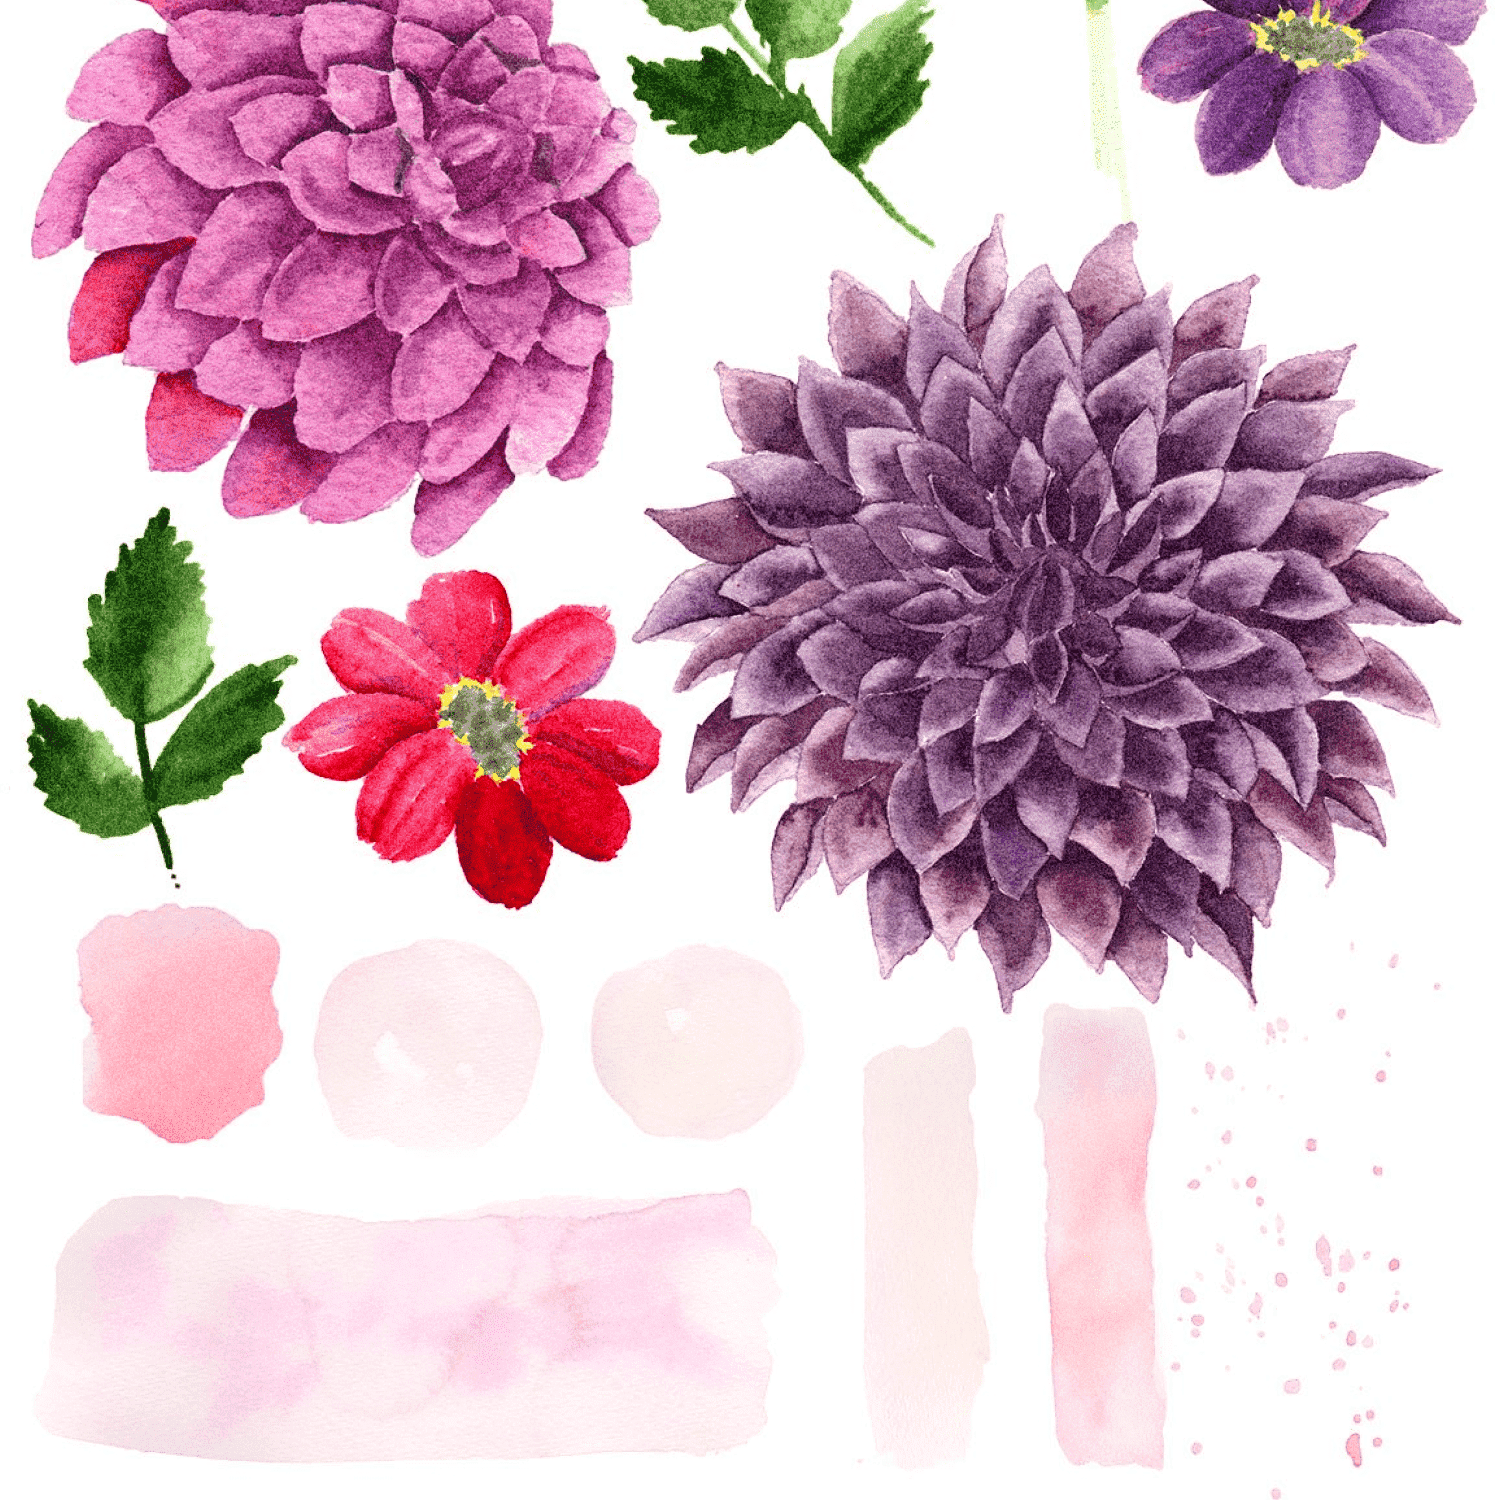 Watercolor Dahlias - Hand Painted Blooms And Textures Cover Image.